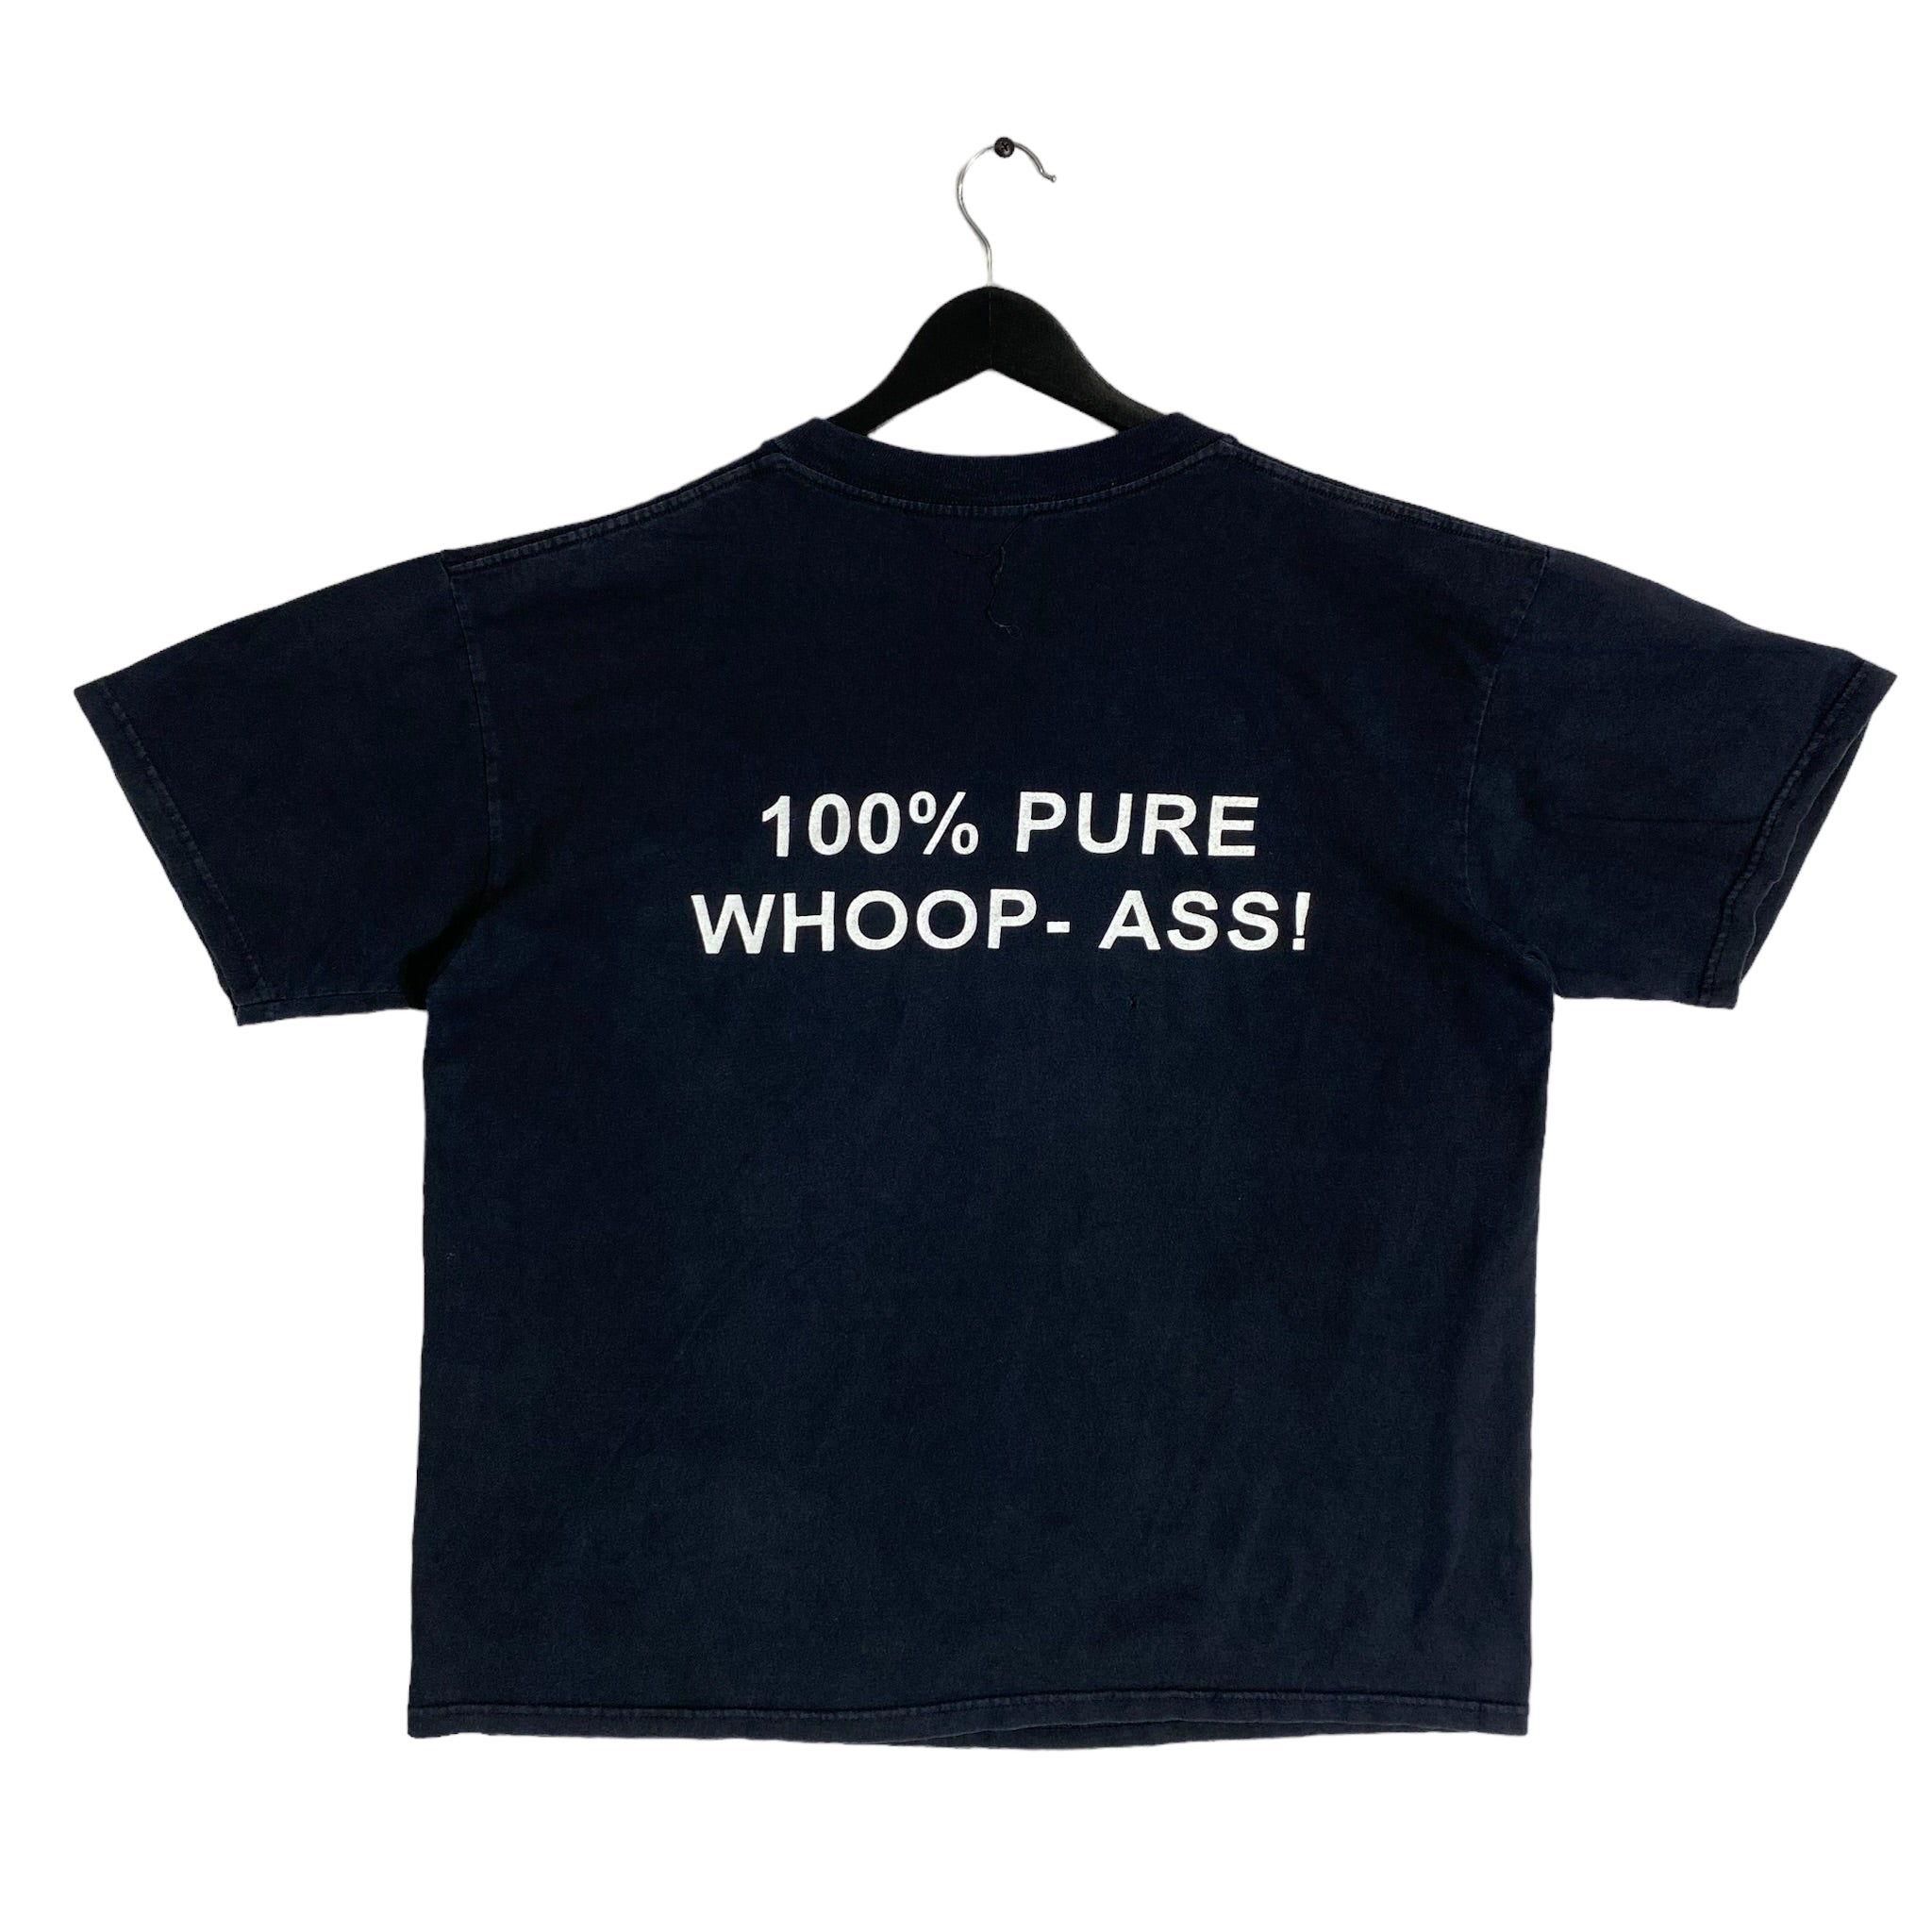 Vintage Stone Cold Steve Austin "100% Pure Whoop Ass" Tee